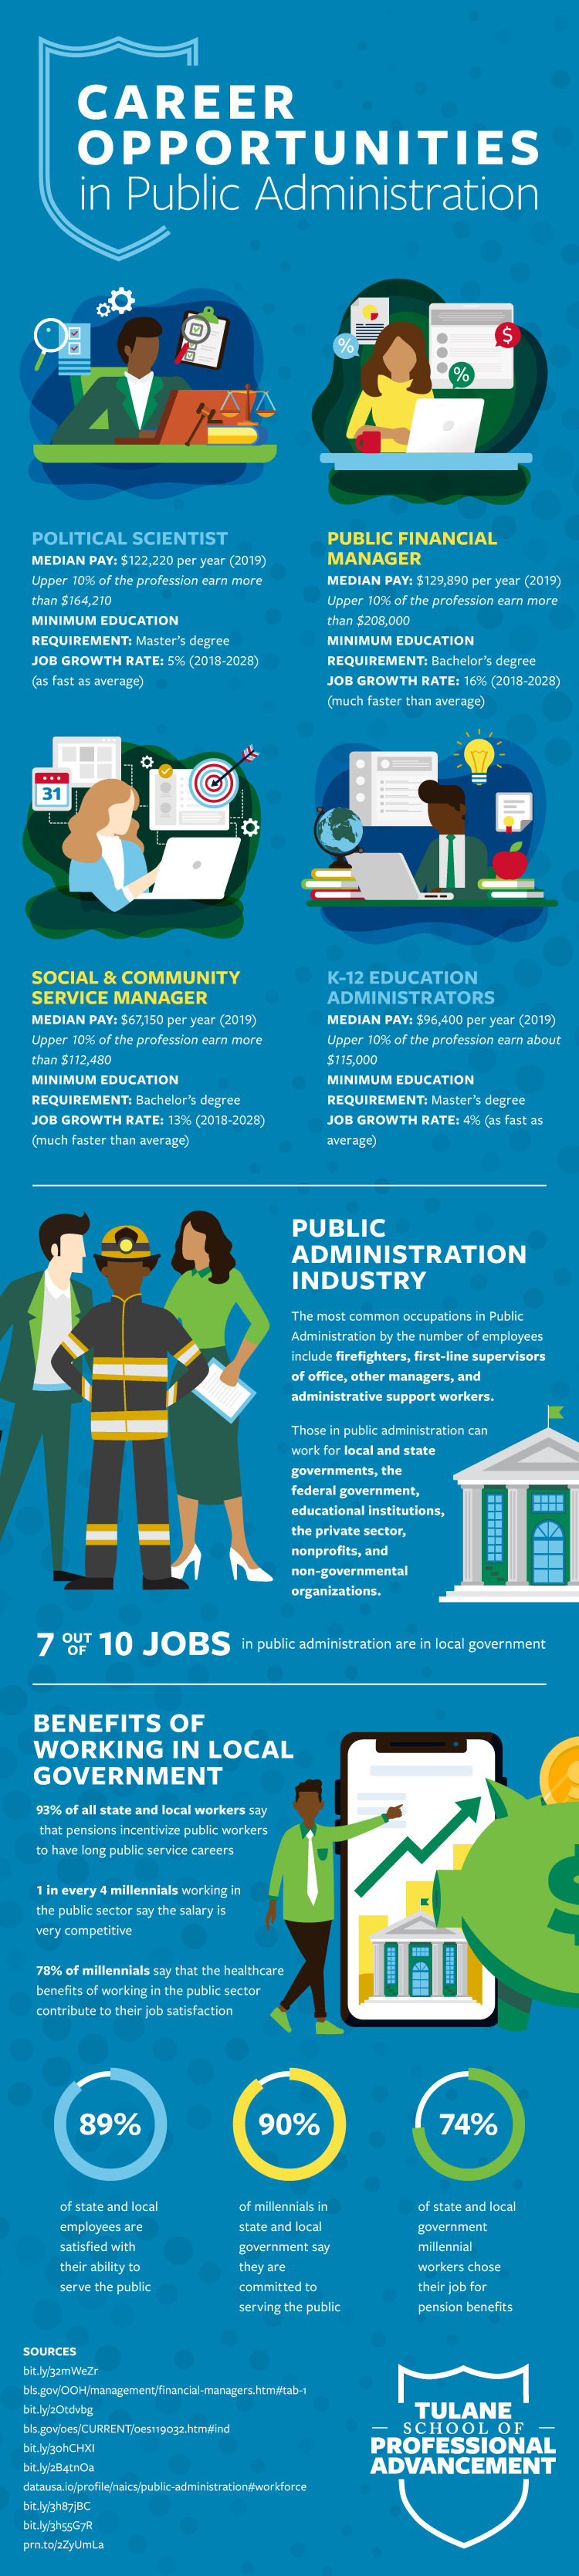 benefits of public administration to society